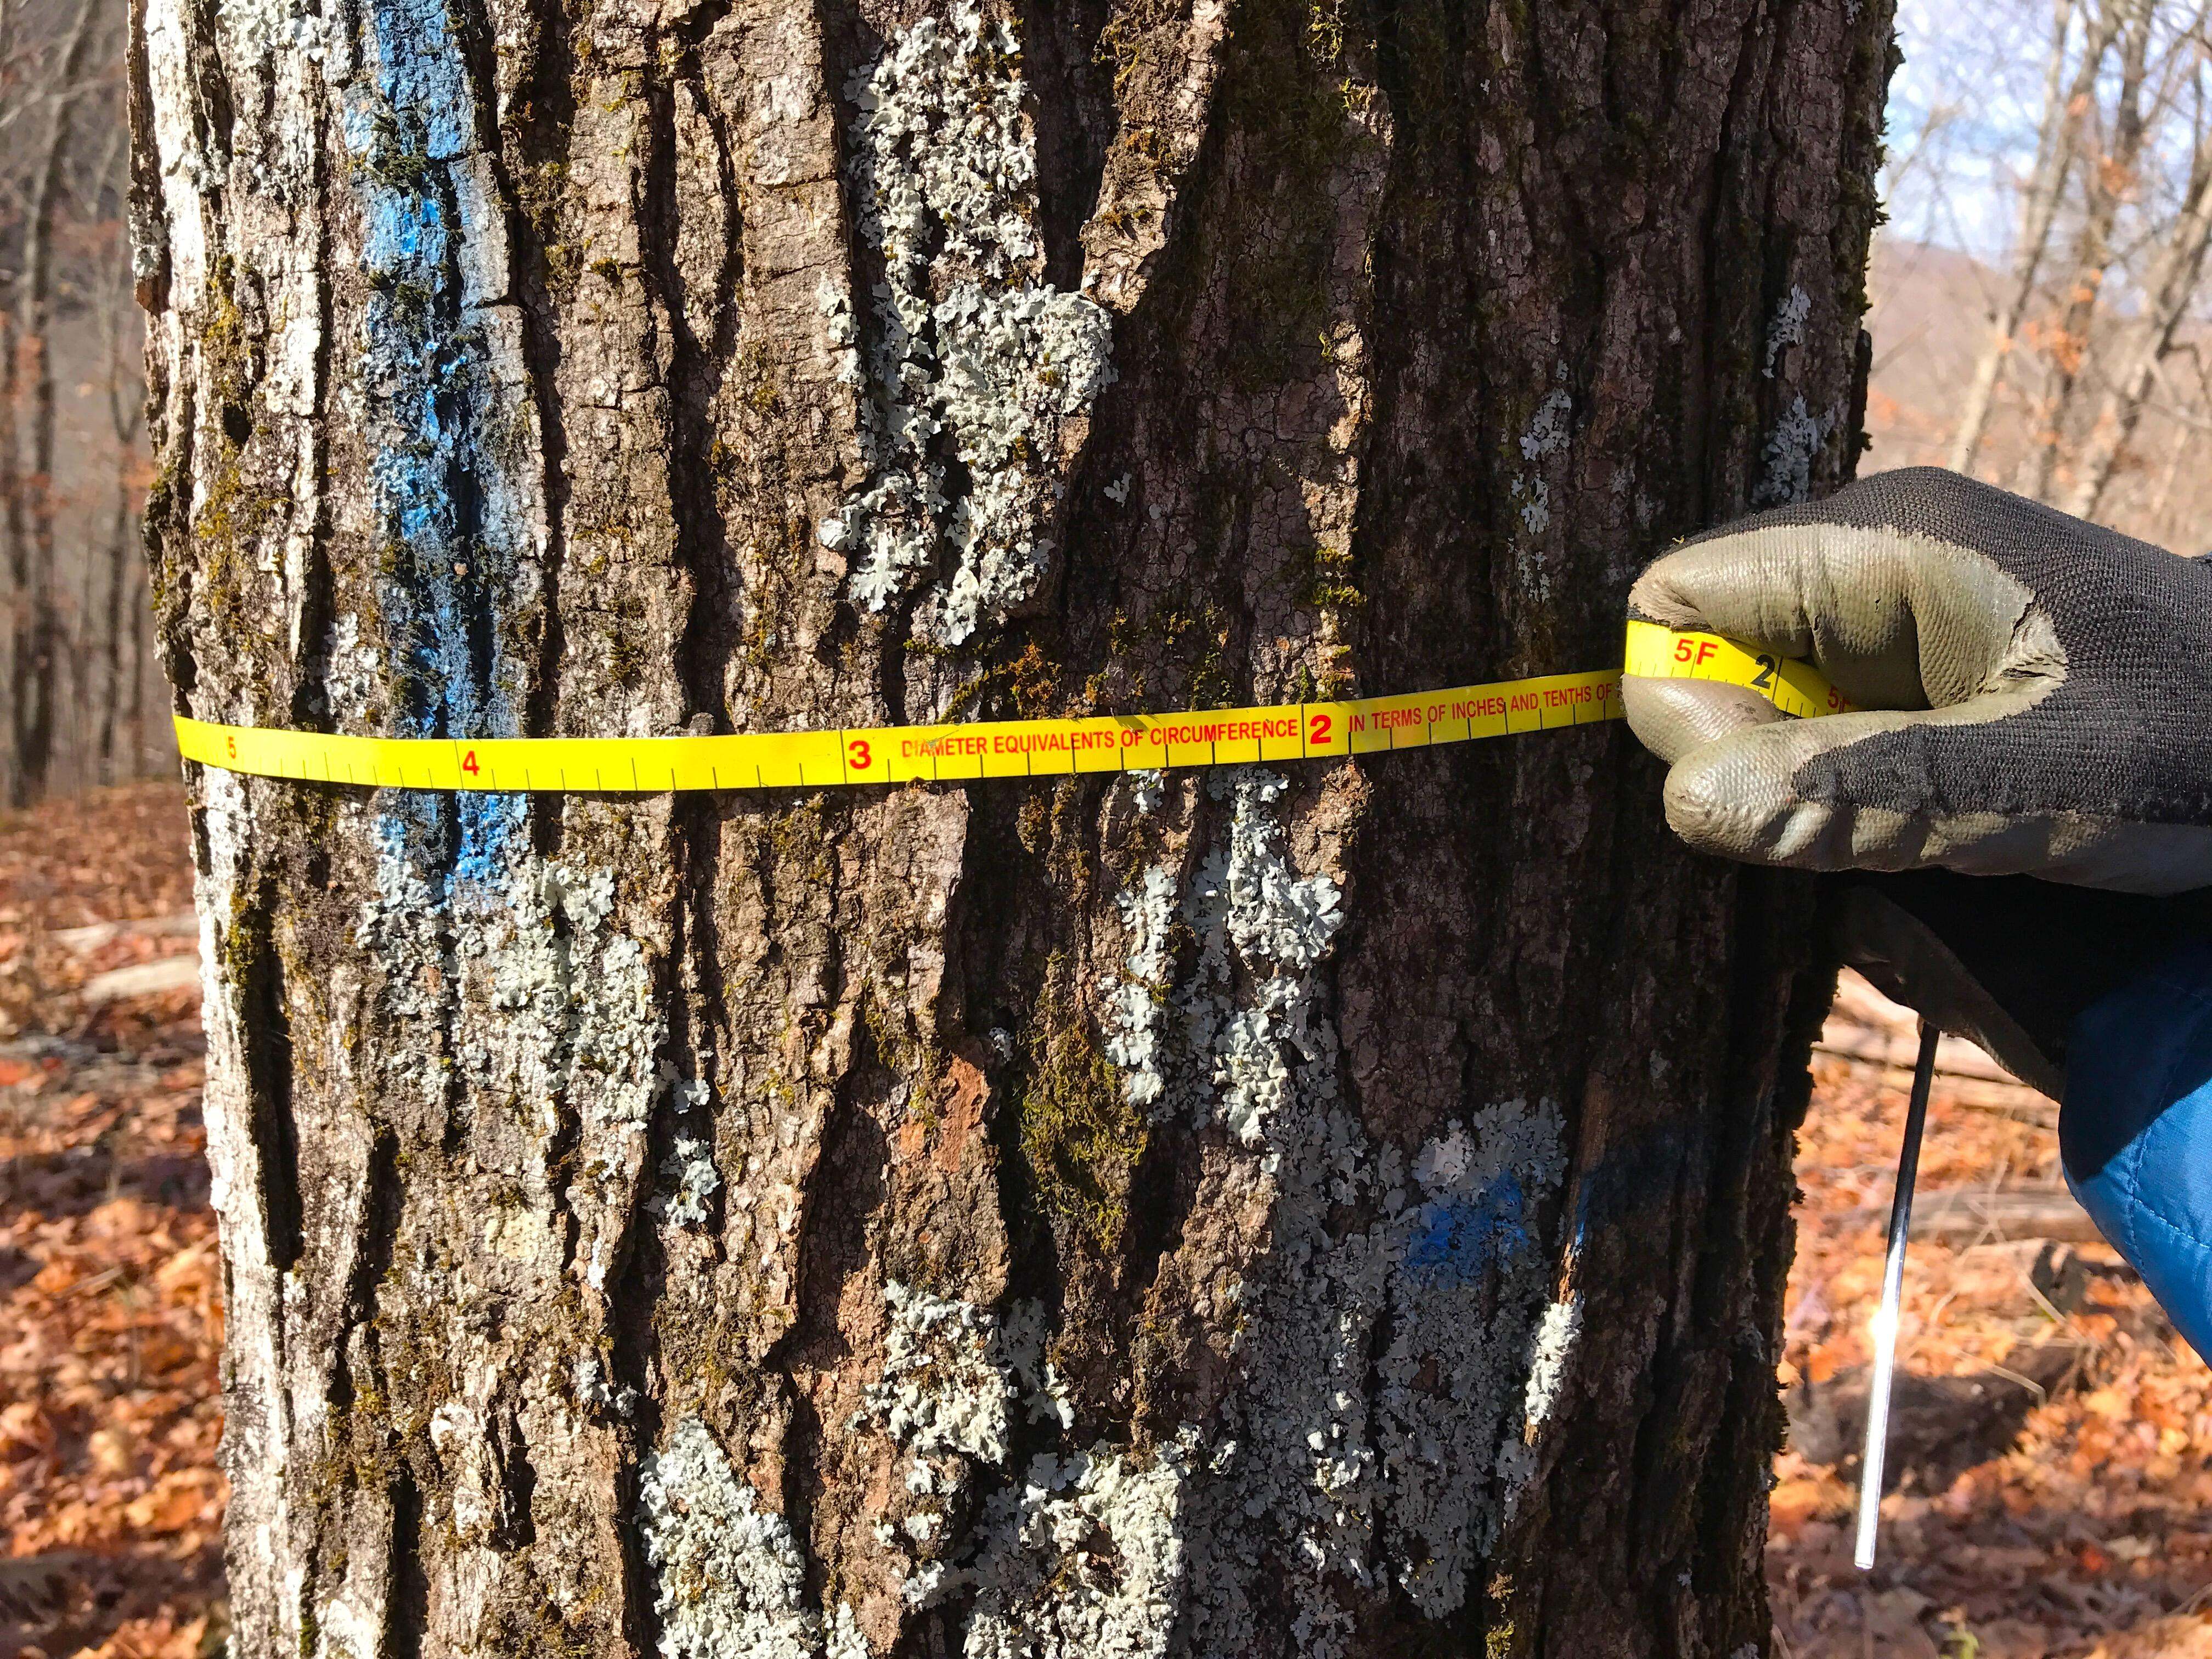 Closeup of gloved hands wrapping a yellow tape measure around a tree trunk.